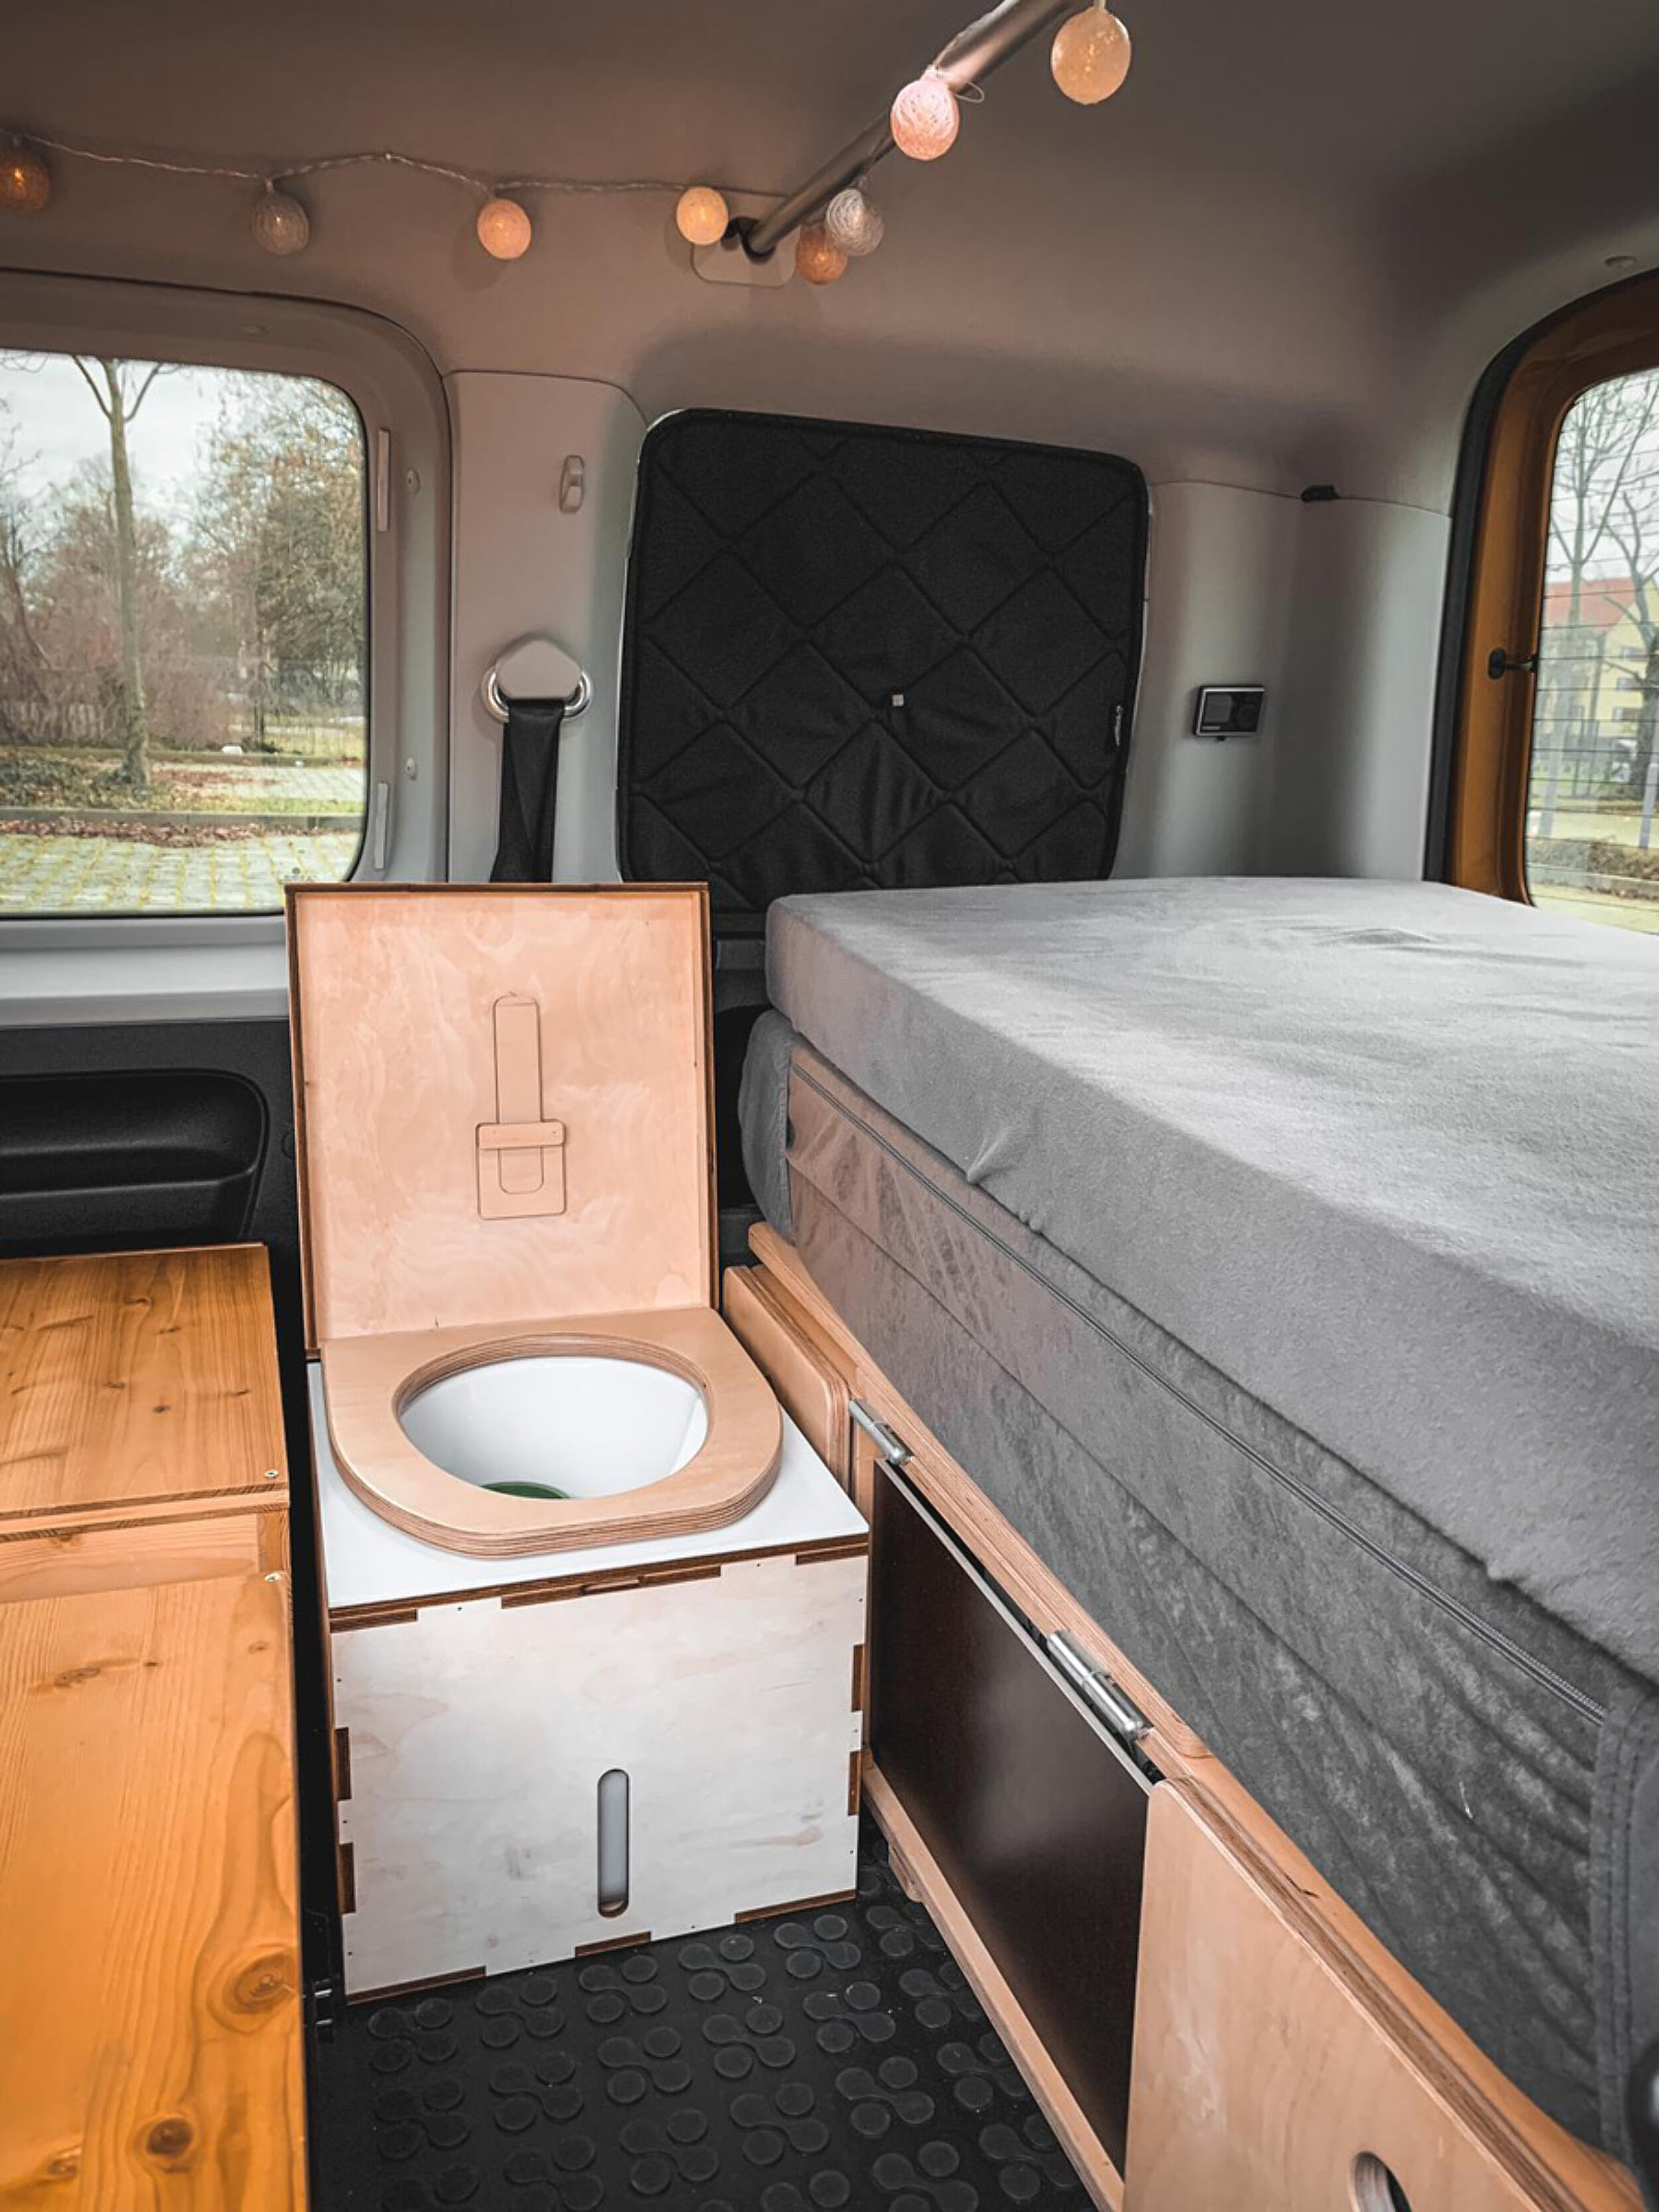 Our PiccoLoo composting toilet offers maximum comfort in the smallest space - ideal for all micro campers